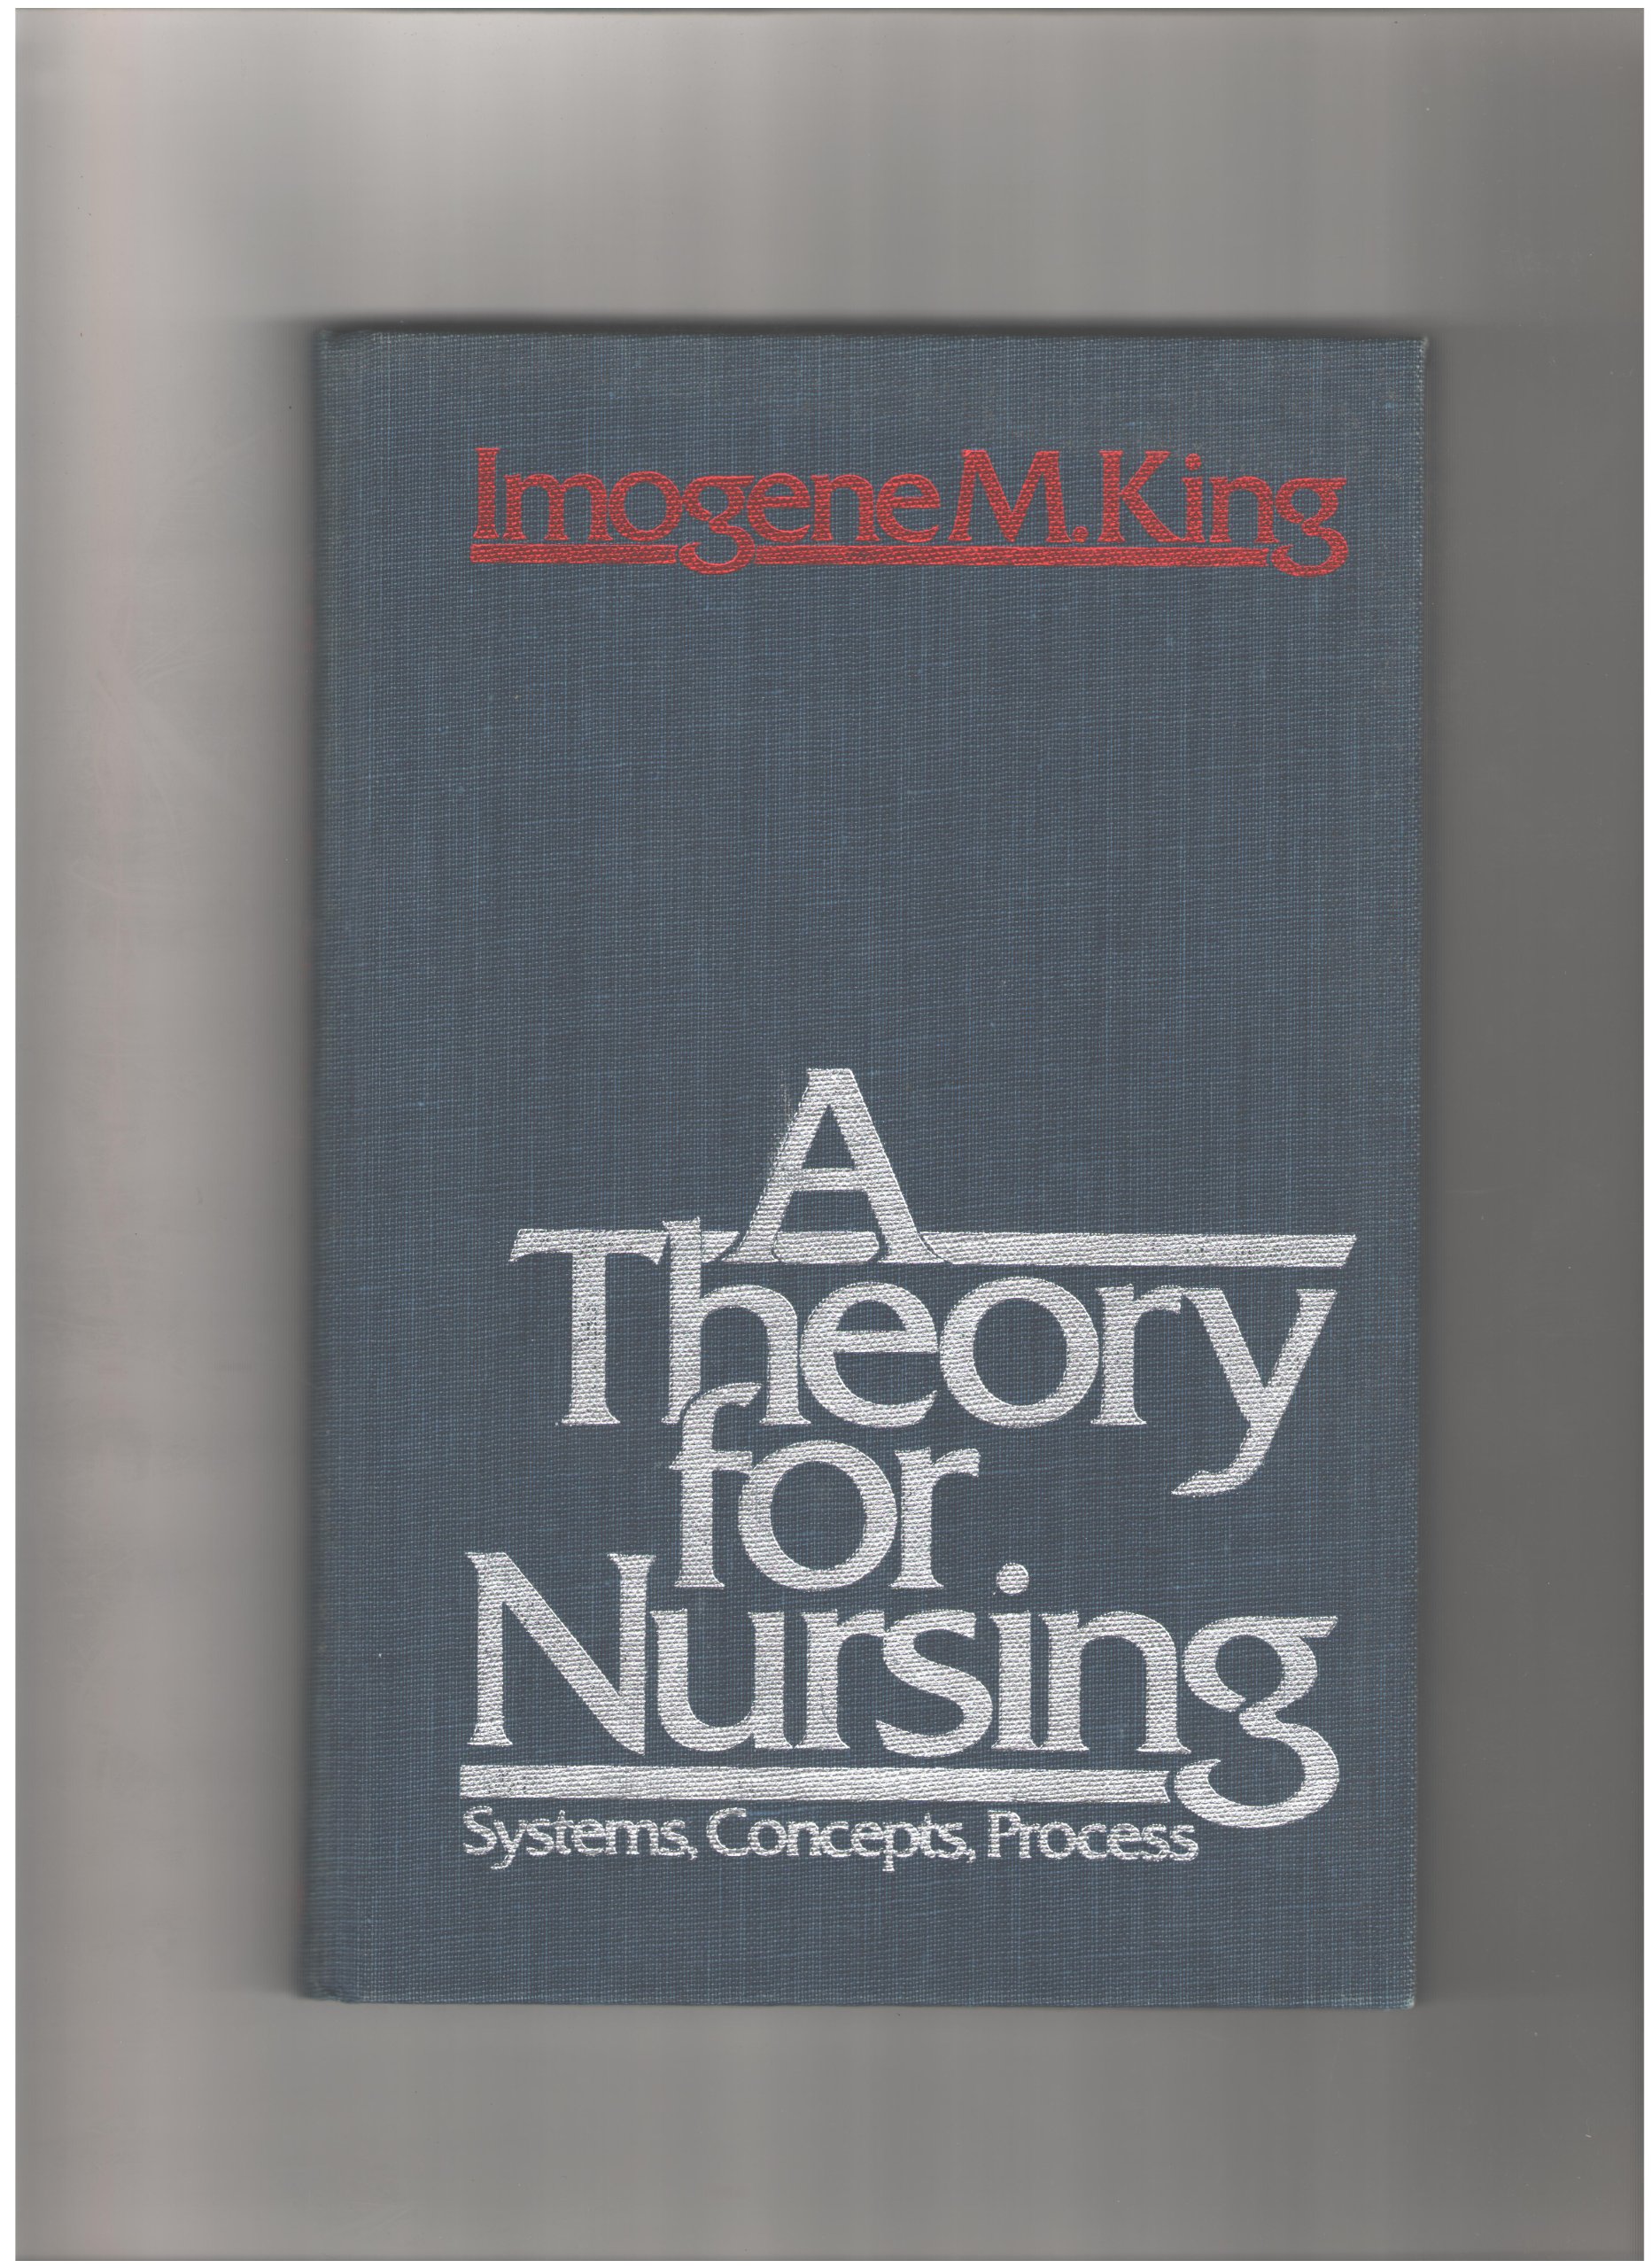 A theory for nursing: Systems, concepts, process